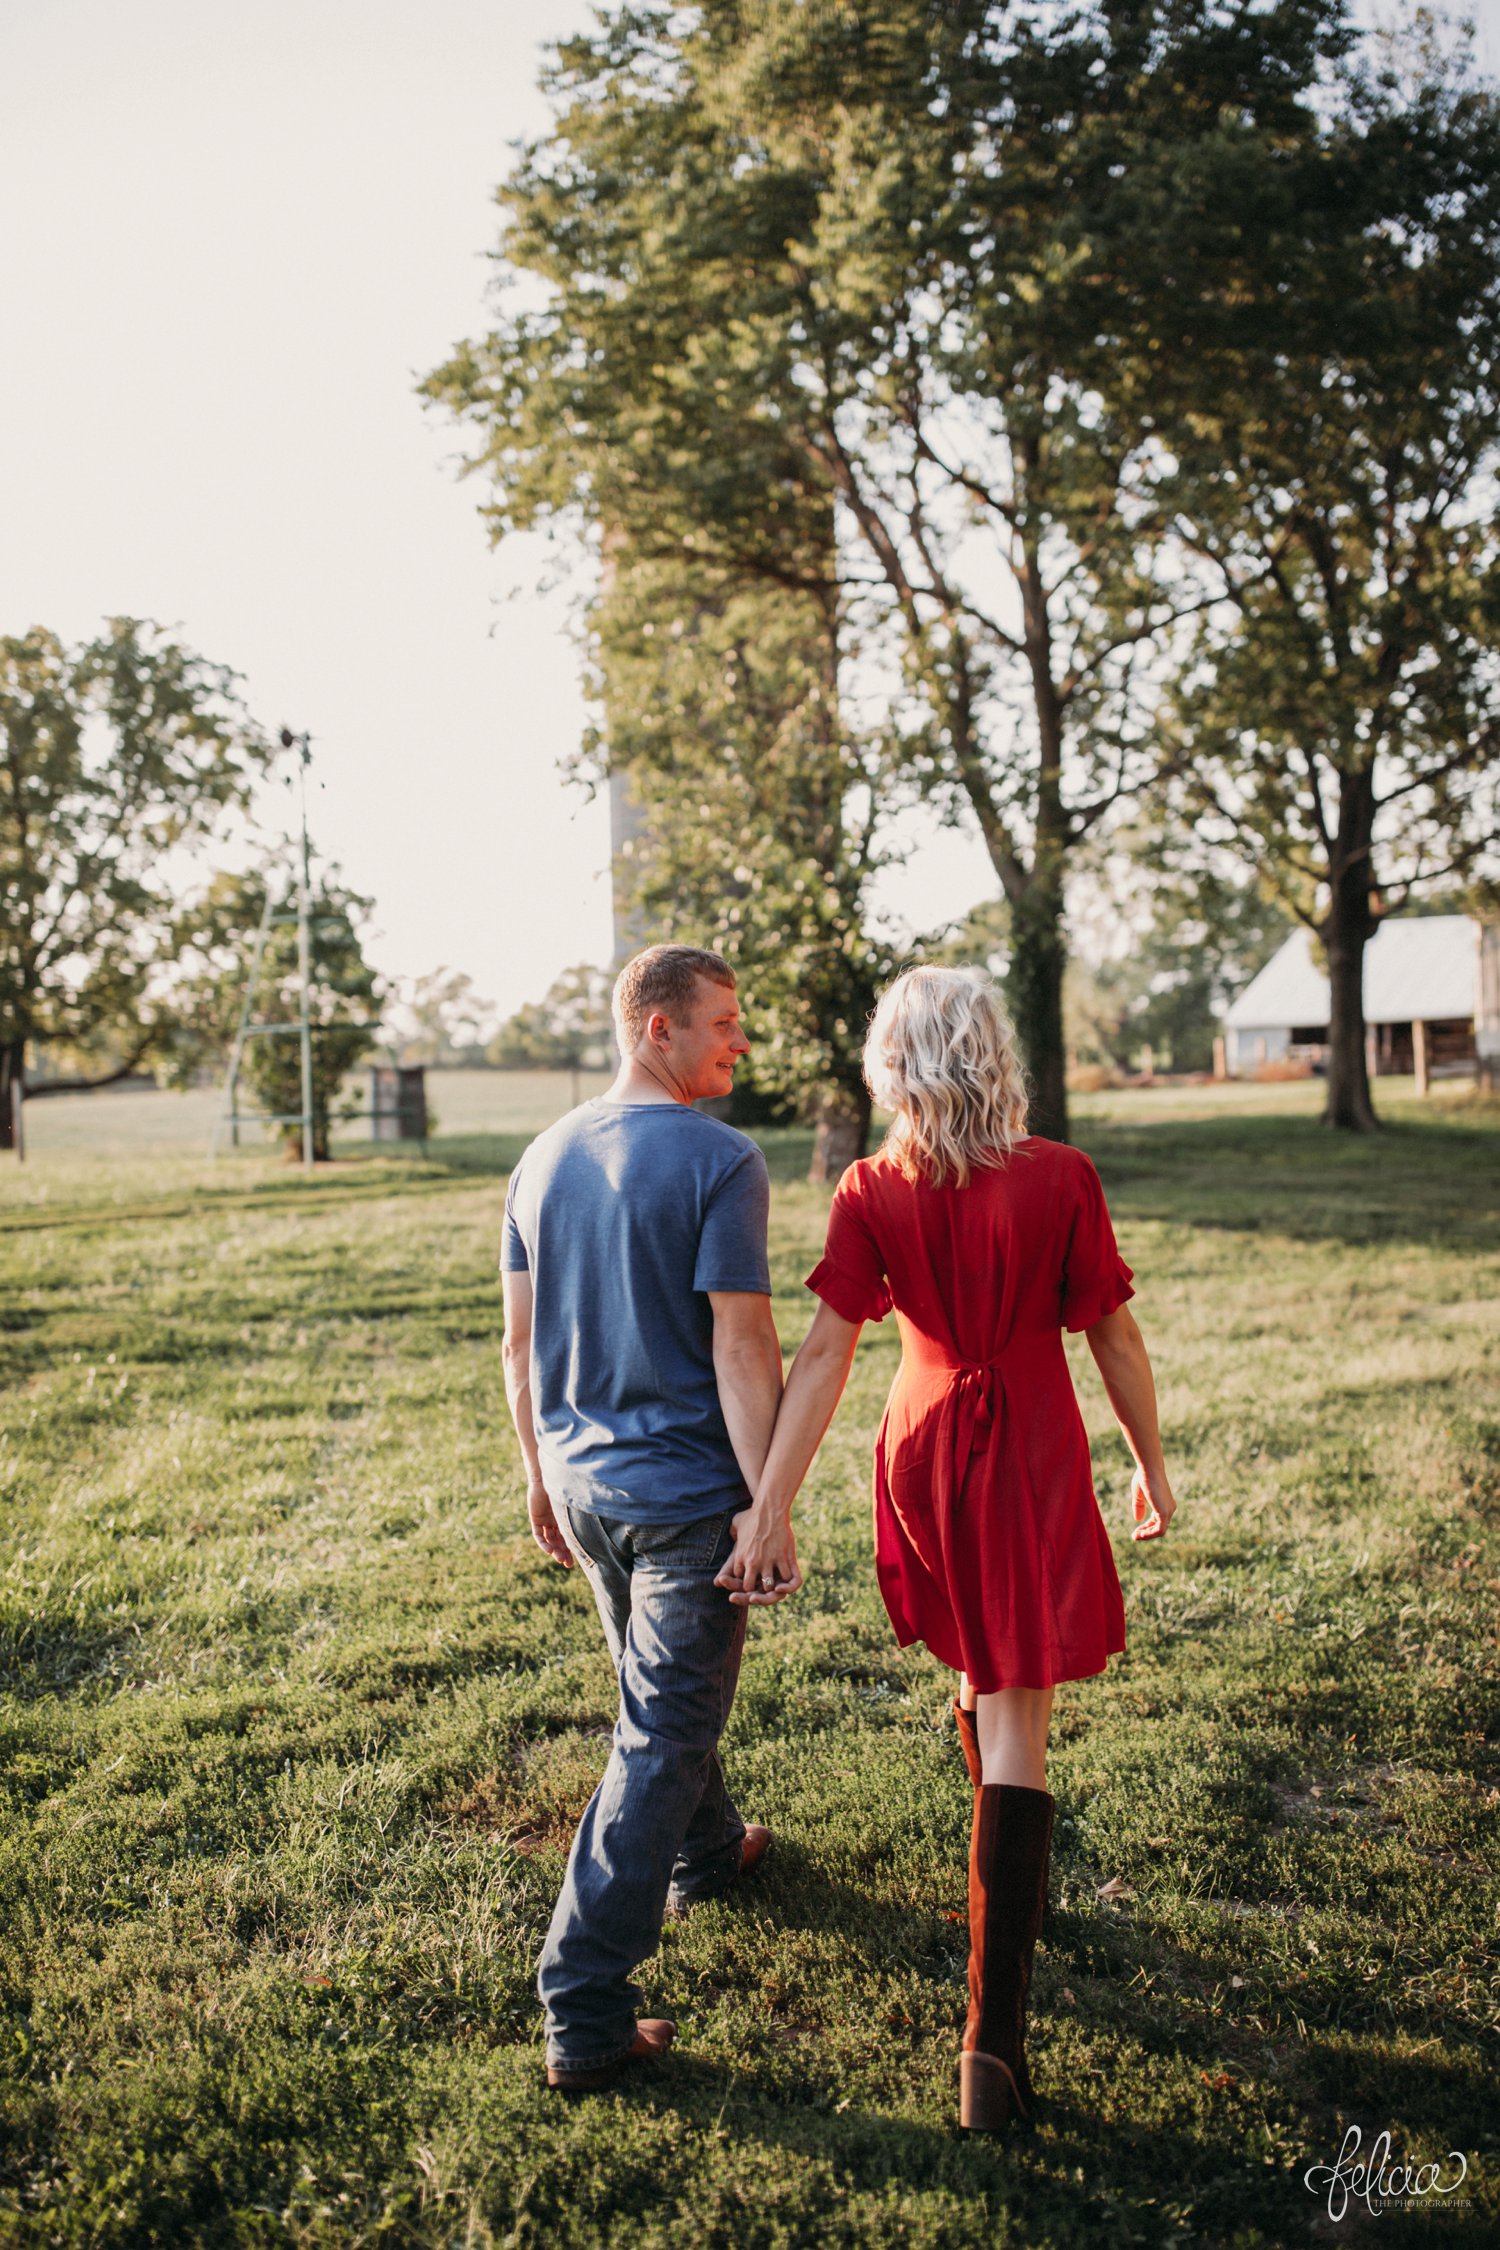 images by feliciathephotographer.com | destination wedding photographer | engagement | farmhouse | country | kansas city | sweet southern | red dress | nordstrom rack | unique halo diamond ring | casual | brown boots | amazon | cowboy | hand in hand | 